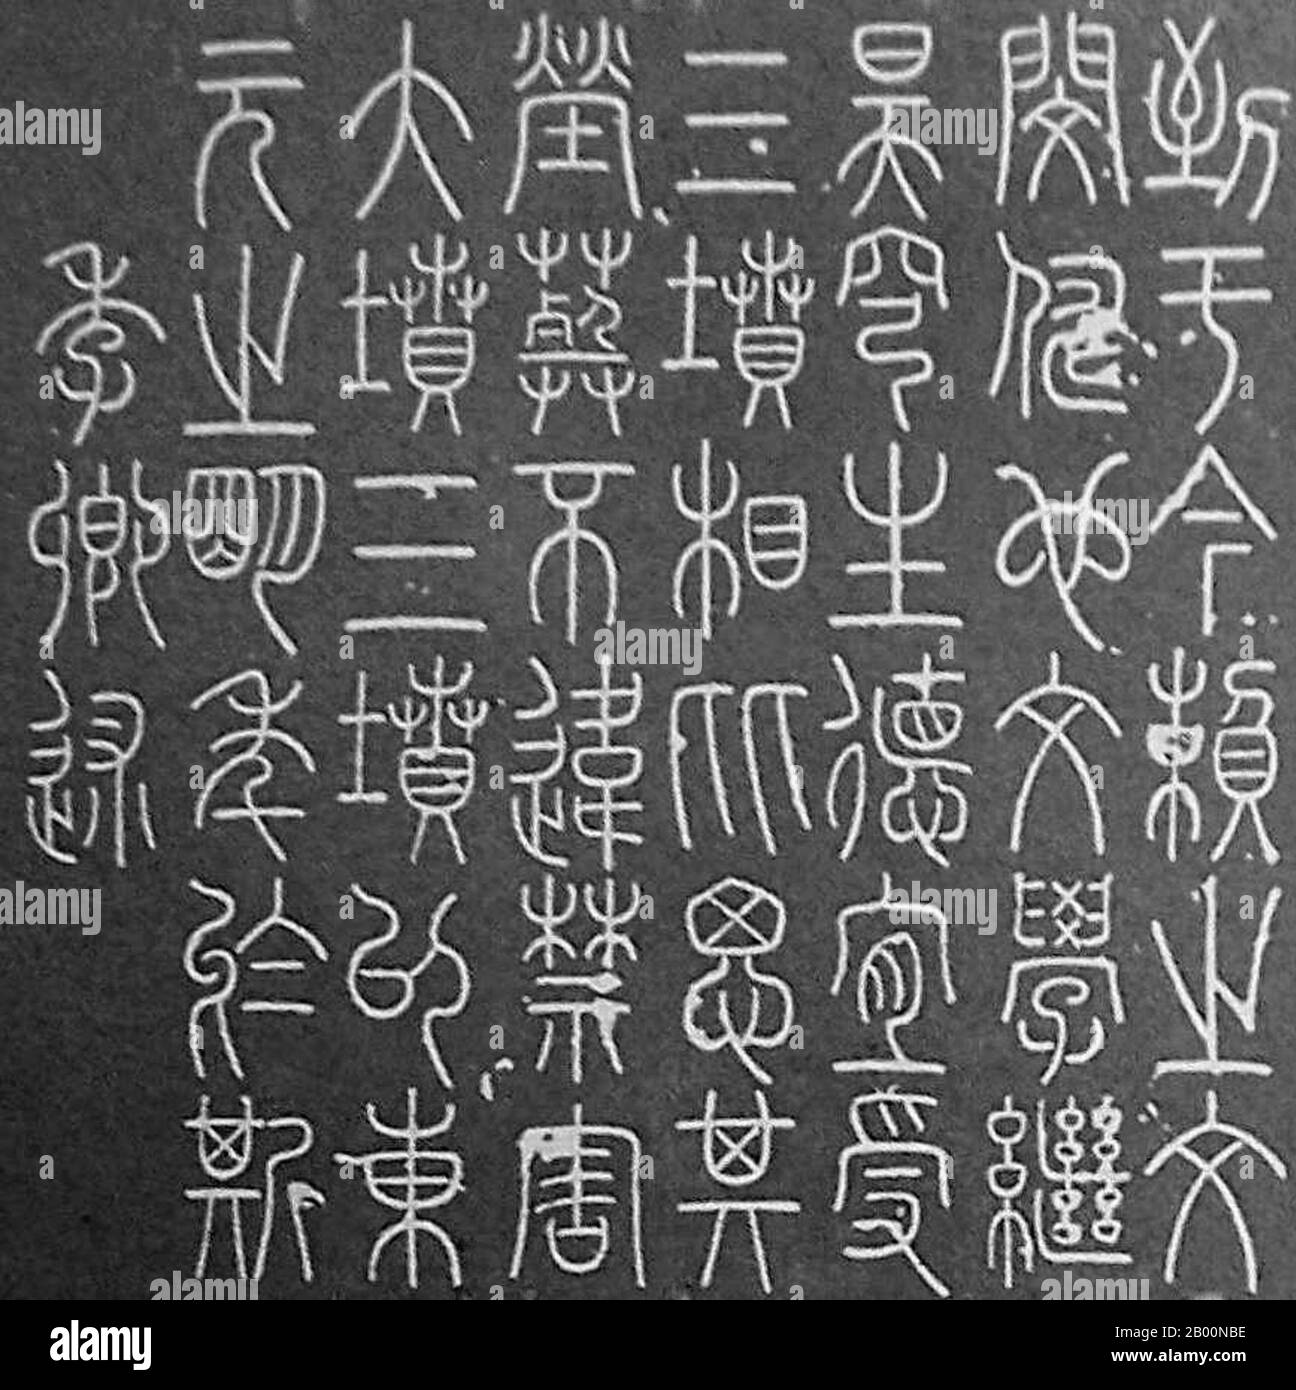 China: Chinese script. Tang Dynasty (618-907) calligraphy attributed to Lee Yang-bing (Li Yangbing), c. 8th century.  Li Yangbing (traditional Chinese: 李陽冰; simplified Chinese: 李阳冰; pinyin: Lǐ Yángbīng, courtesy name: Shaowen) was a high-ranking Tang Dynasty Chinese government official (imperial magistrate), important literary figure, noted calligrapher, and relative of the famous Chinese poet Li Bai. Li Yangbing (also appearing in English as Li Yang-Ping) is notable for being the initial editor and compiler of the poetry of his kinsman, Li Bai. Stock Photo